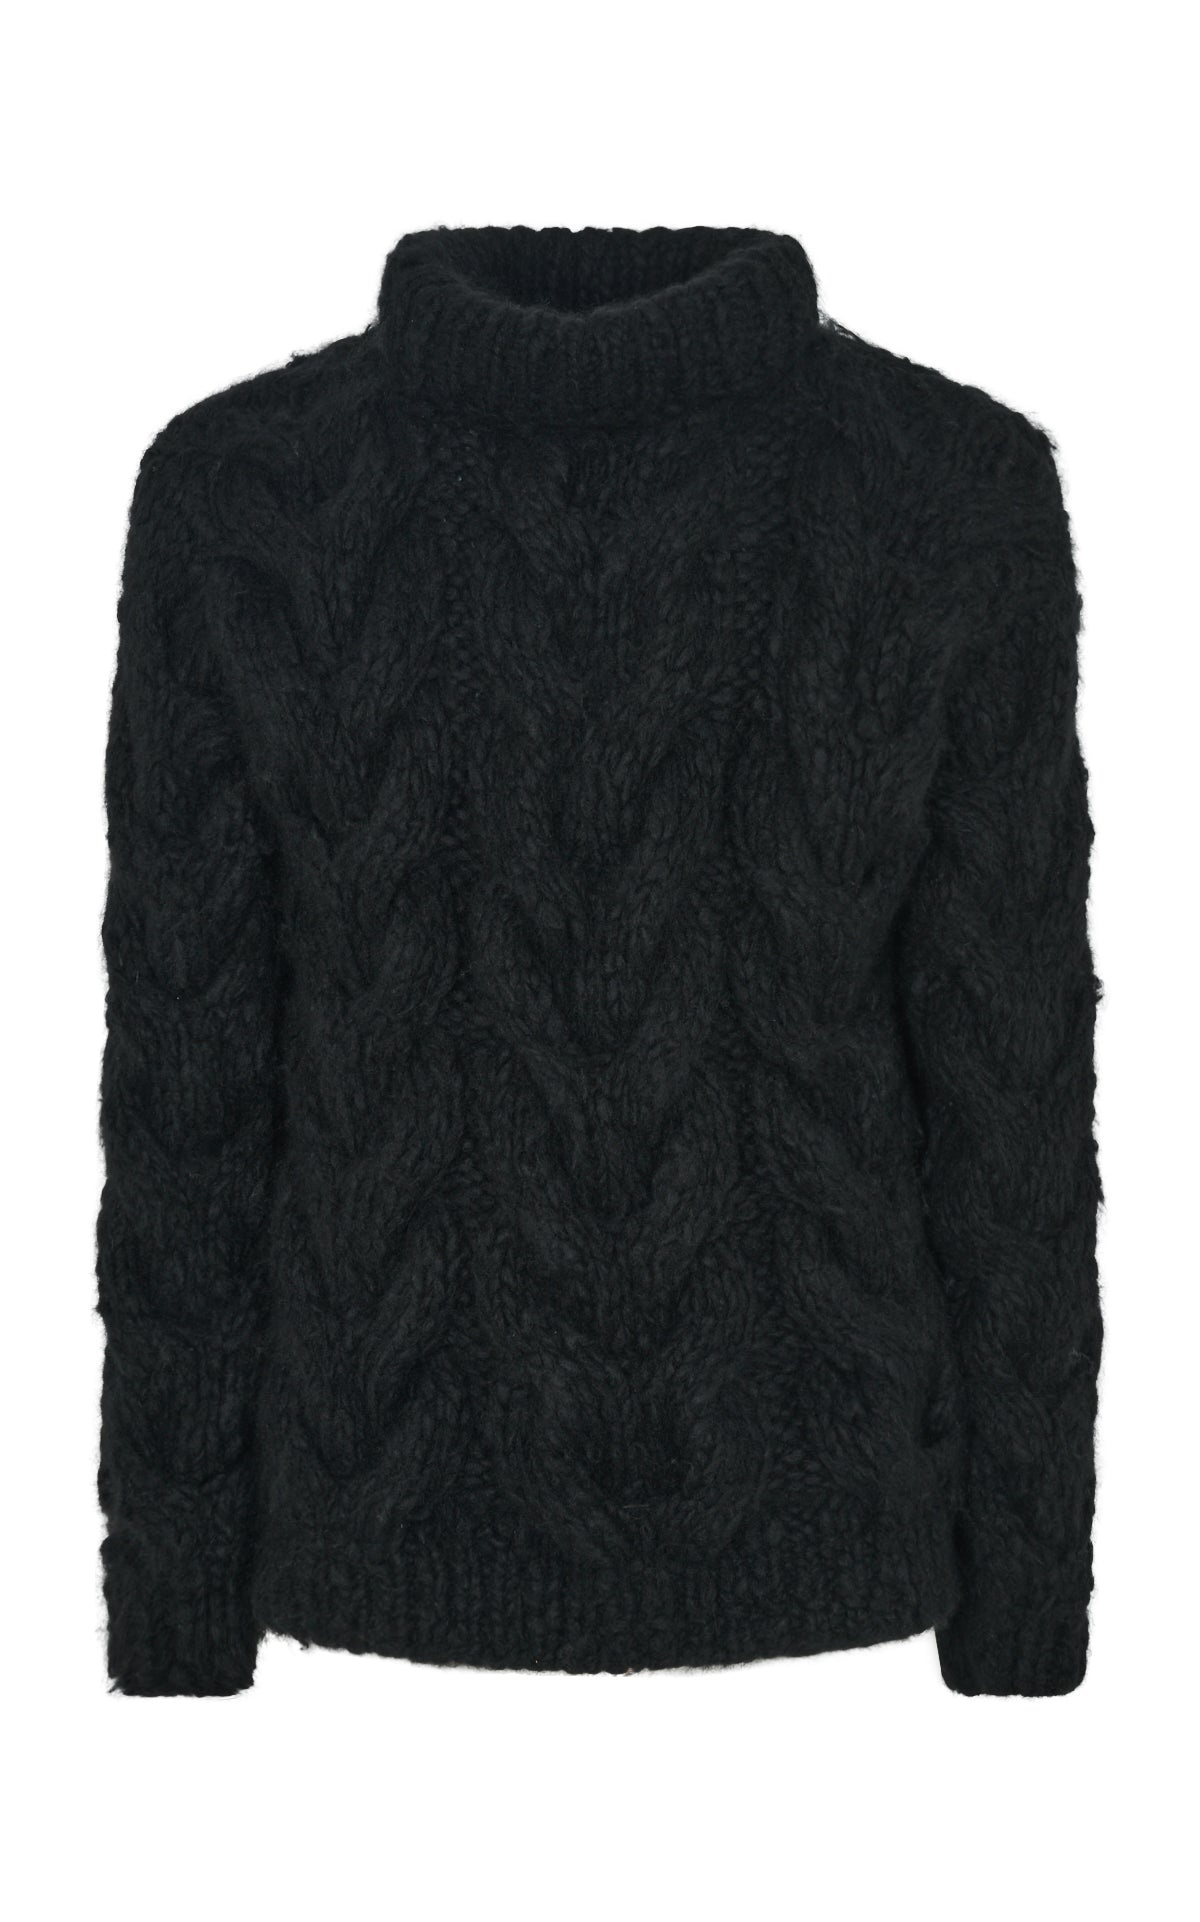 Ray Knit Sweater in Black Welfat Cashmere - 1